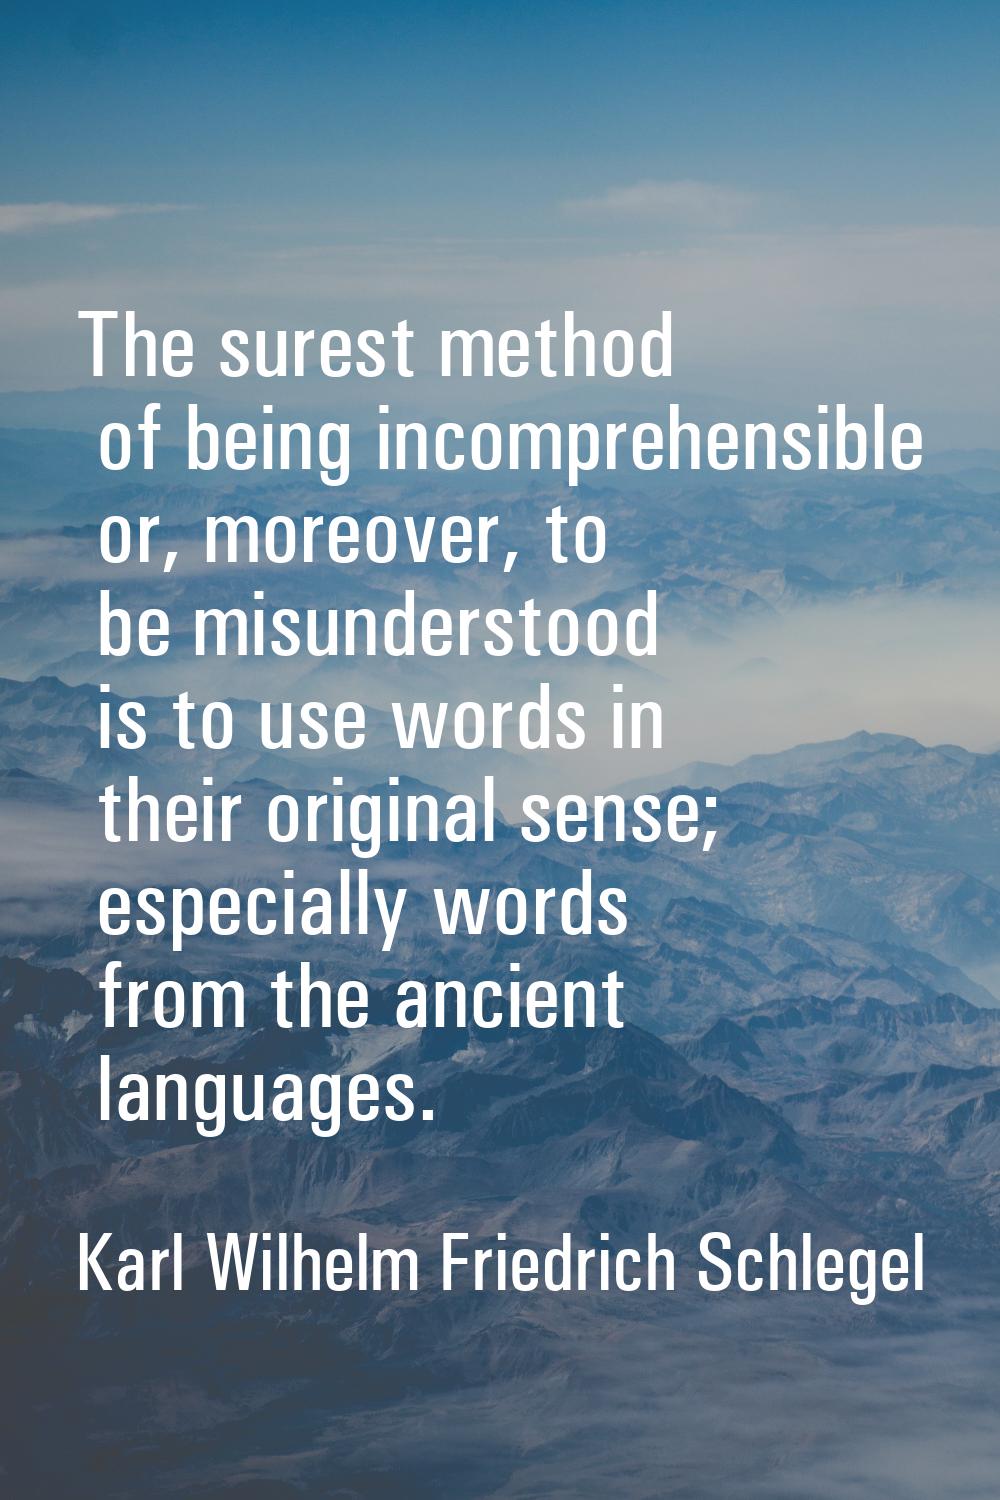 The surest method of being incomprehensible or, moreover, to be misunderstood is to use words in th